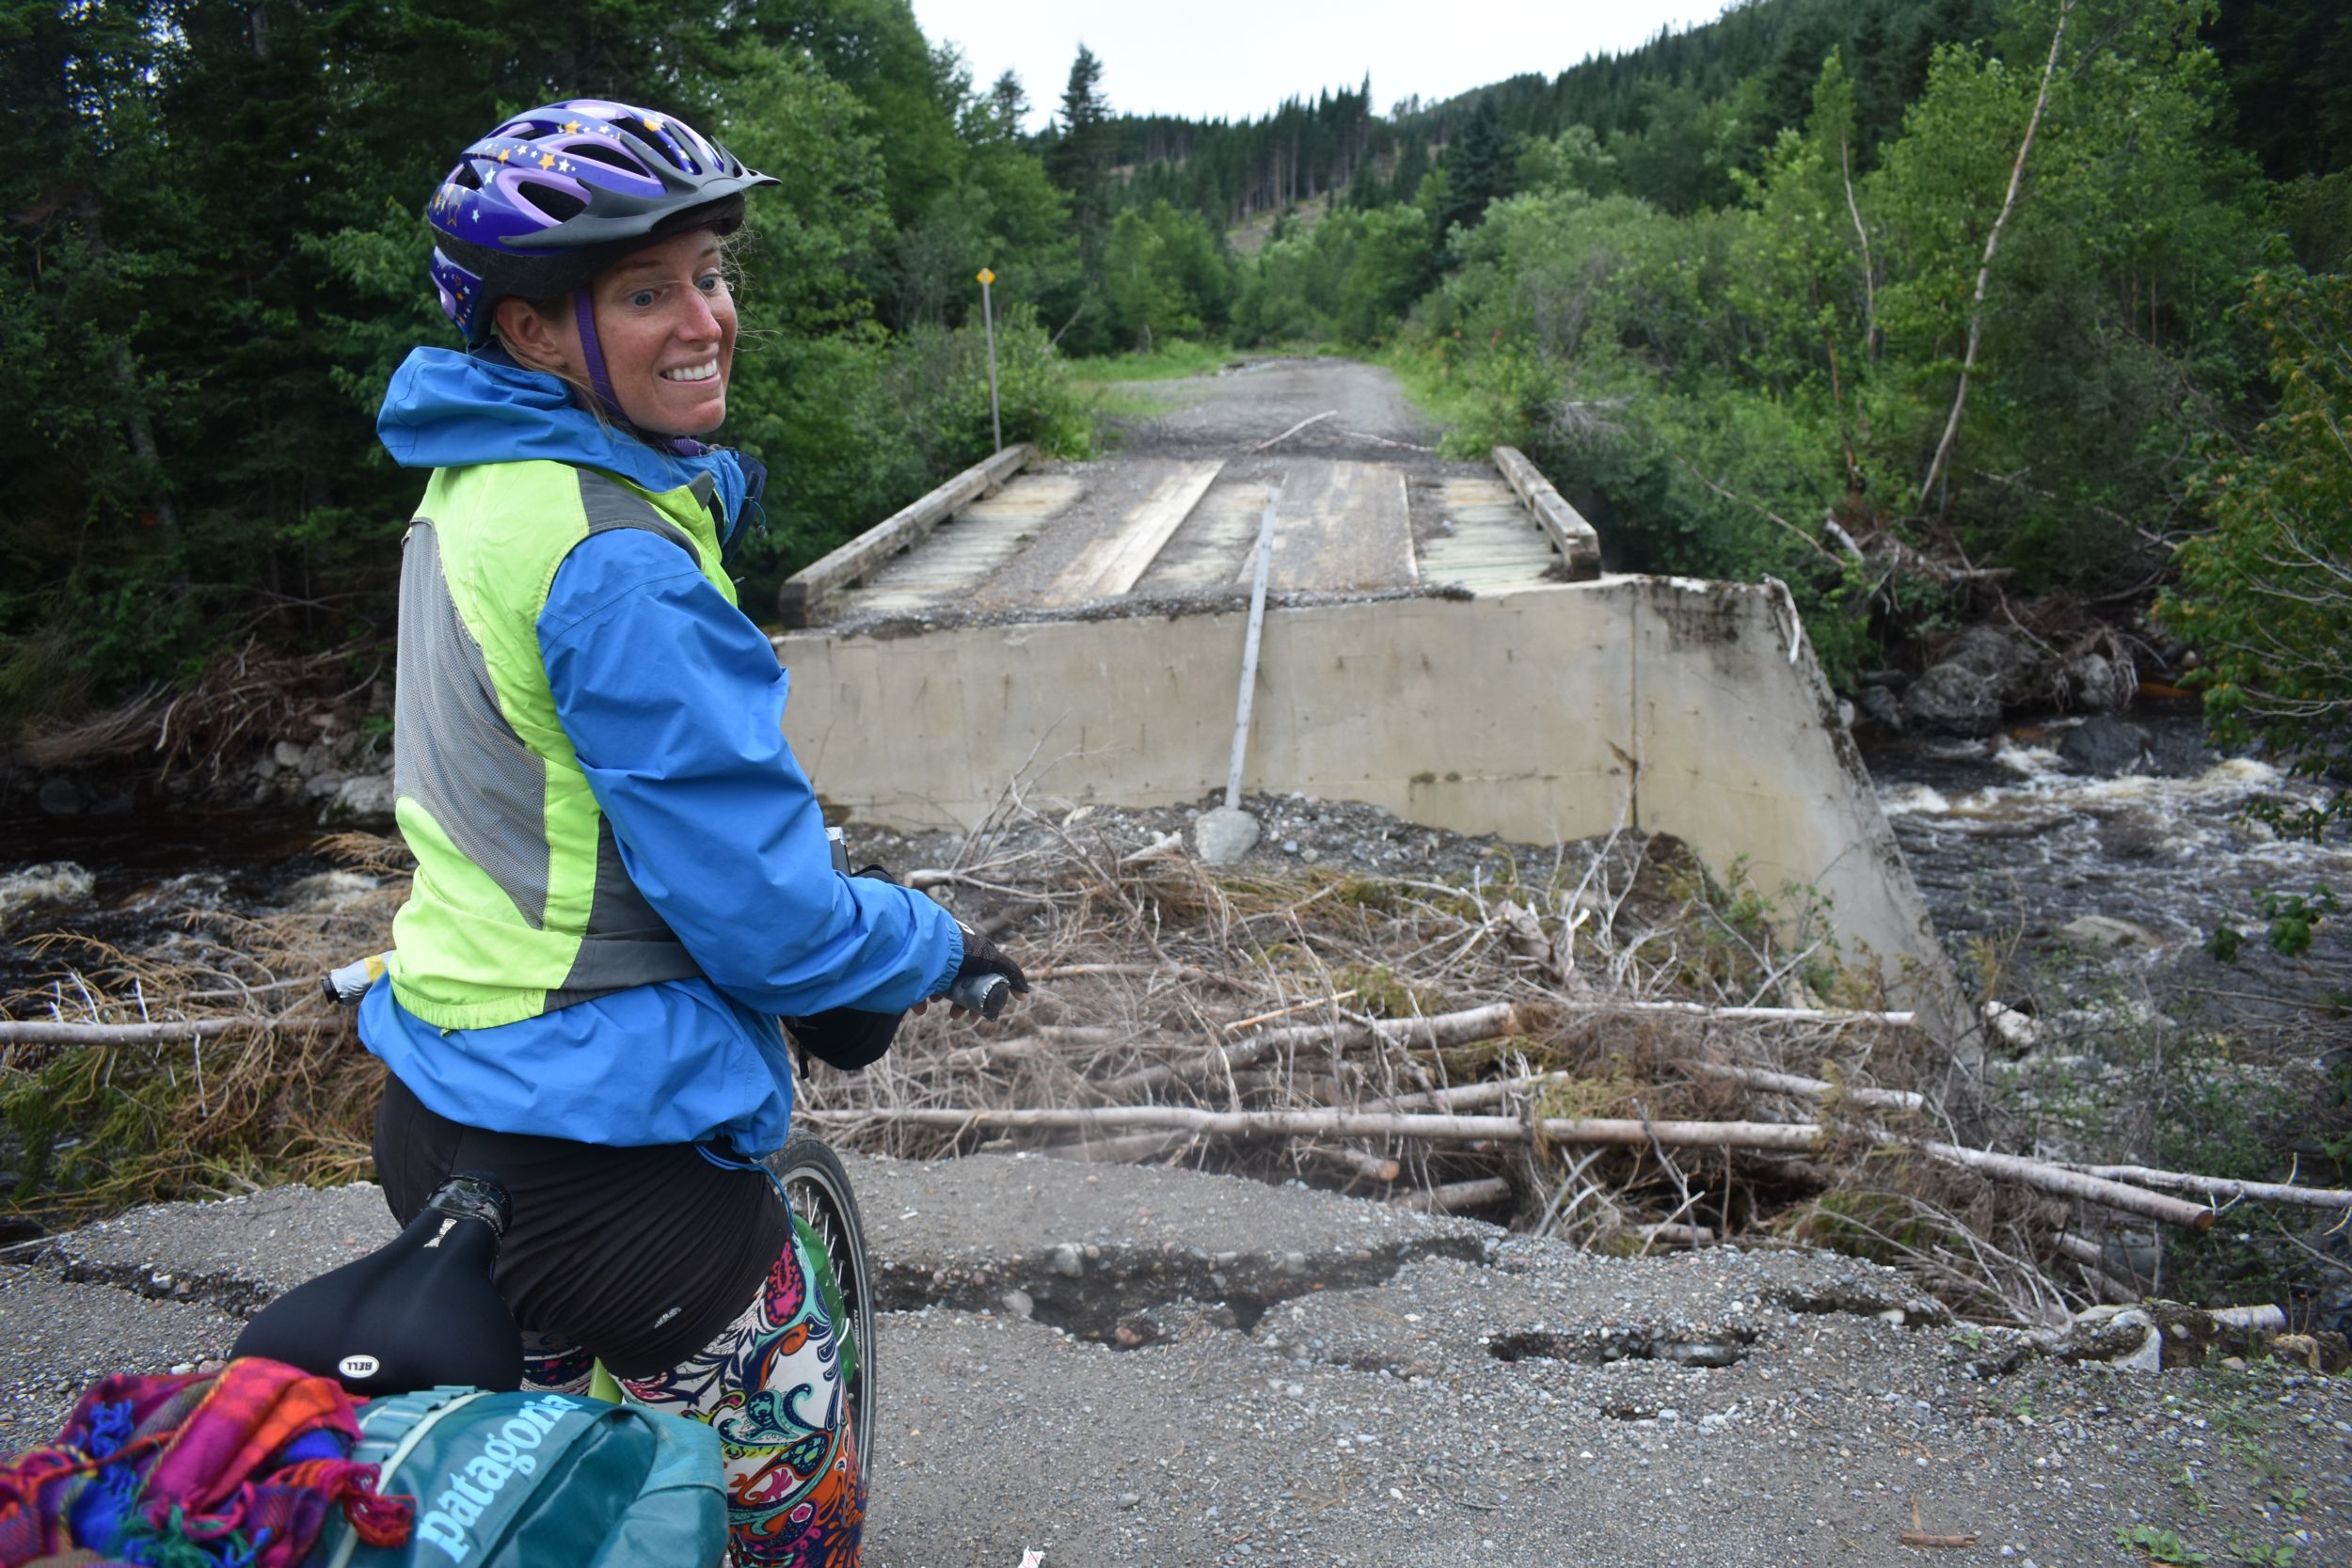 Laura grimaces in front of a washed out bridge